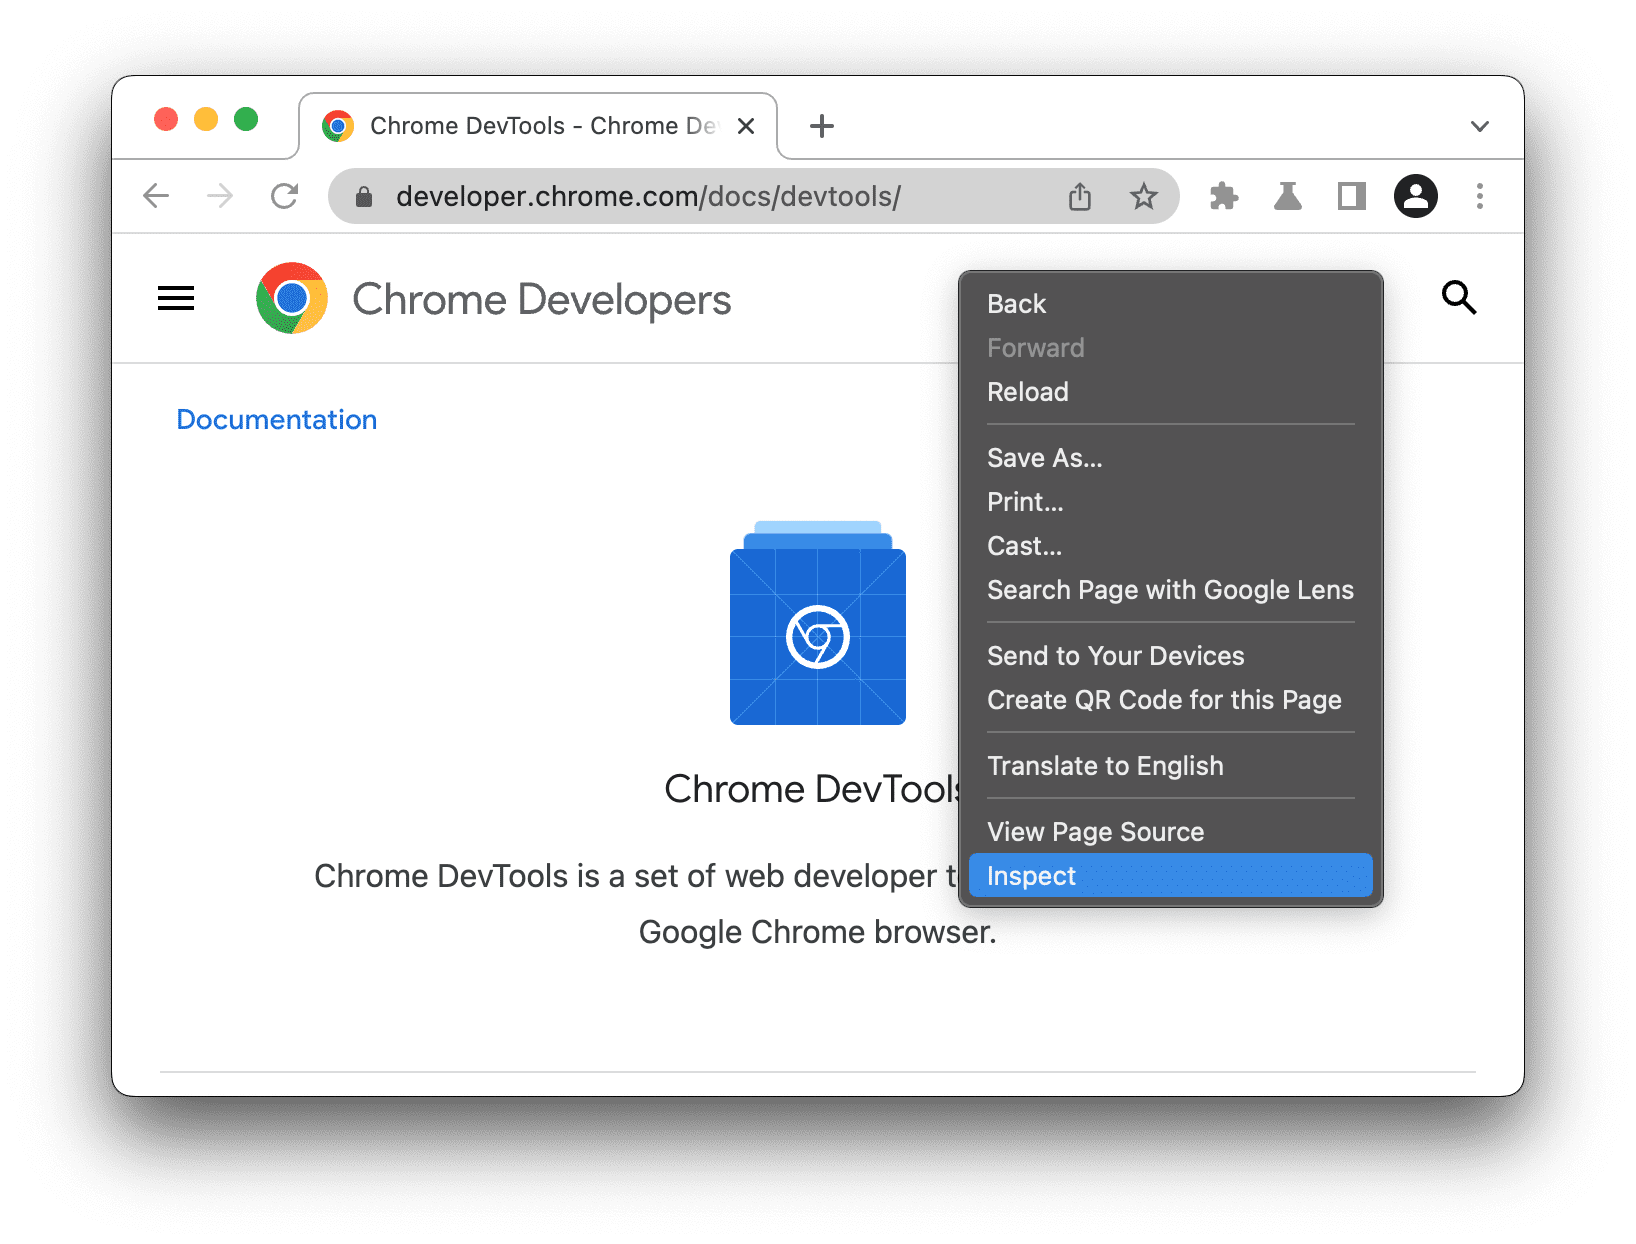 The Inspect option in a drop-down menu in Chrome.